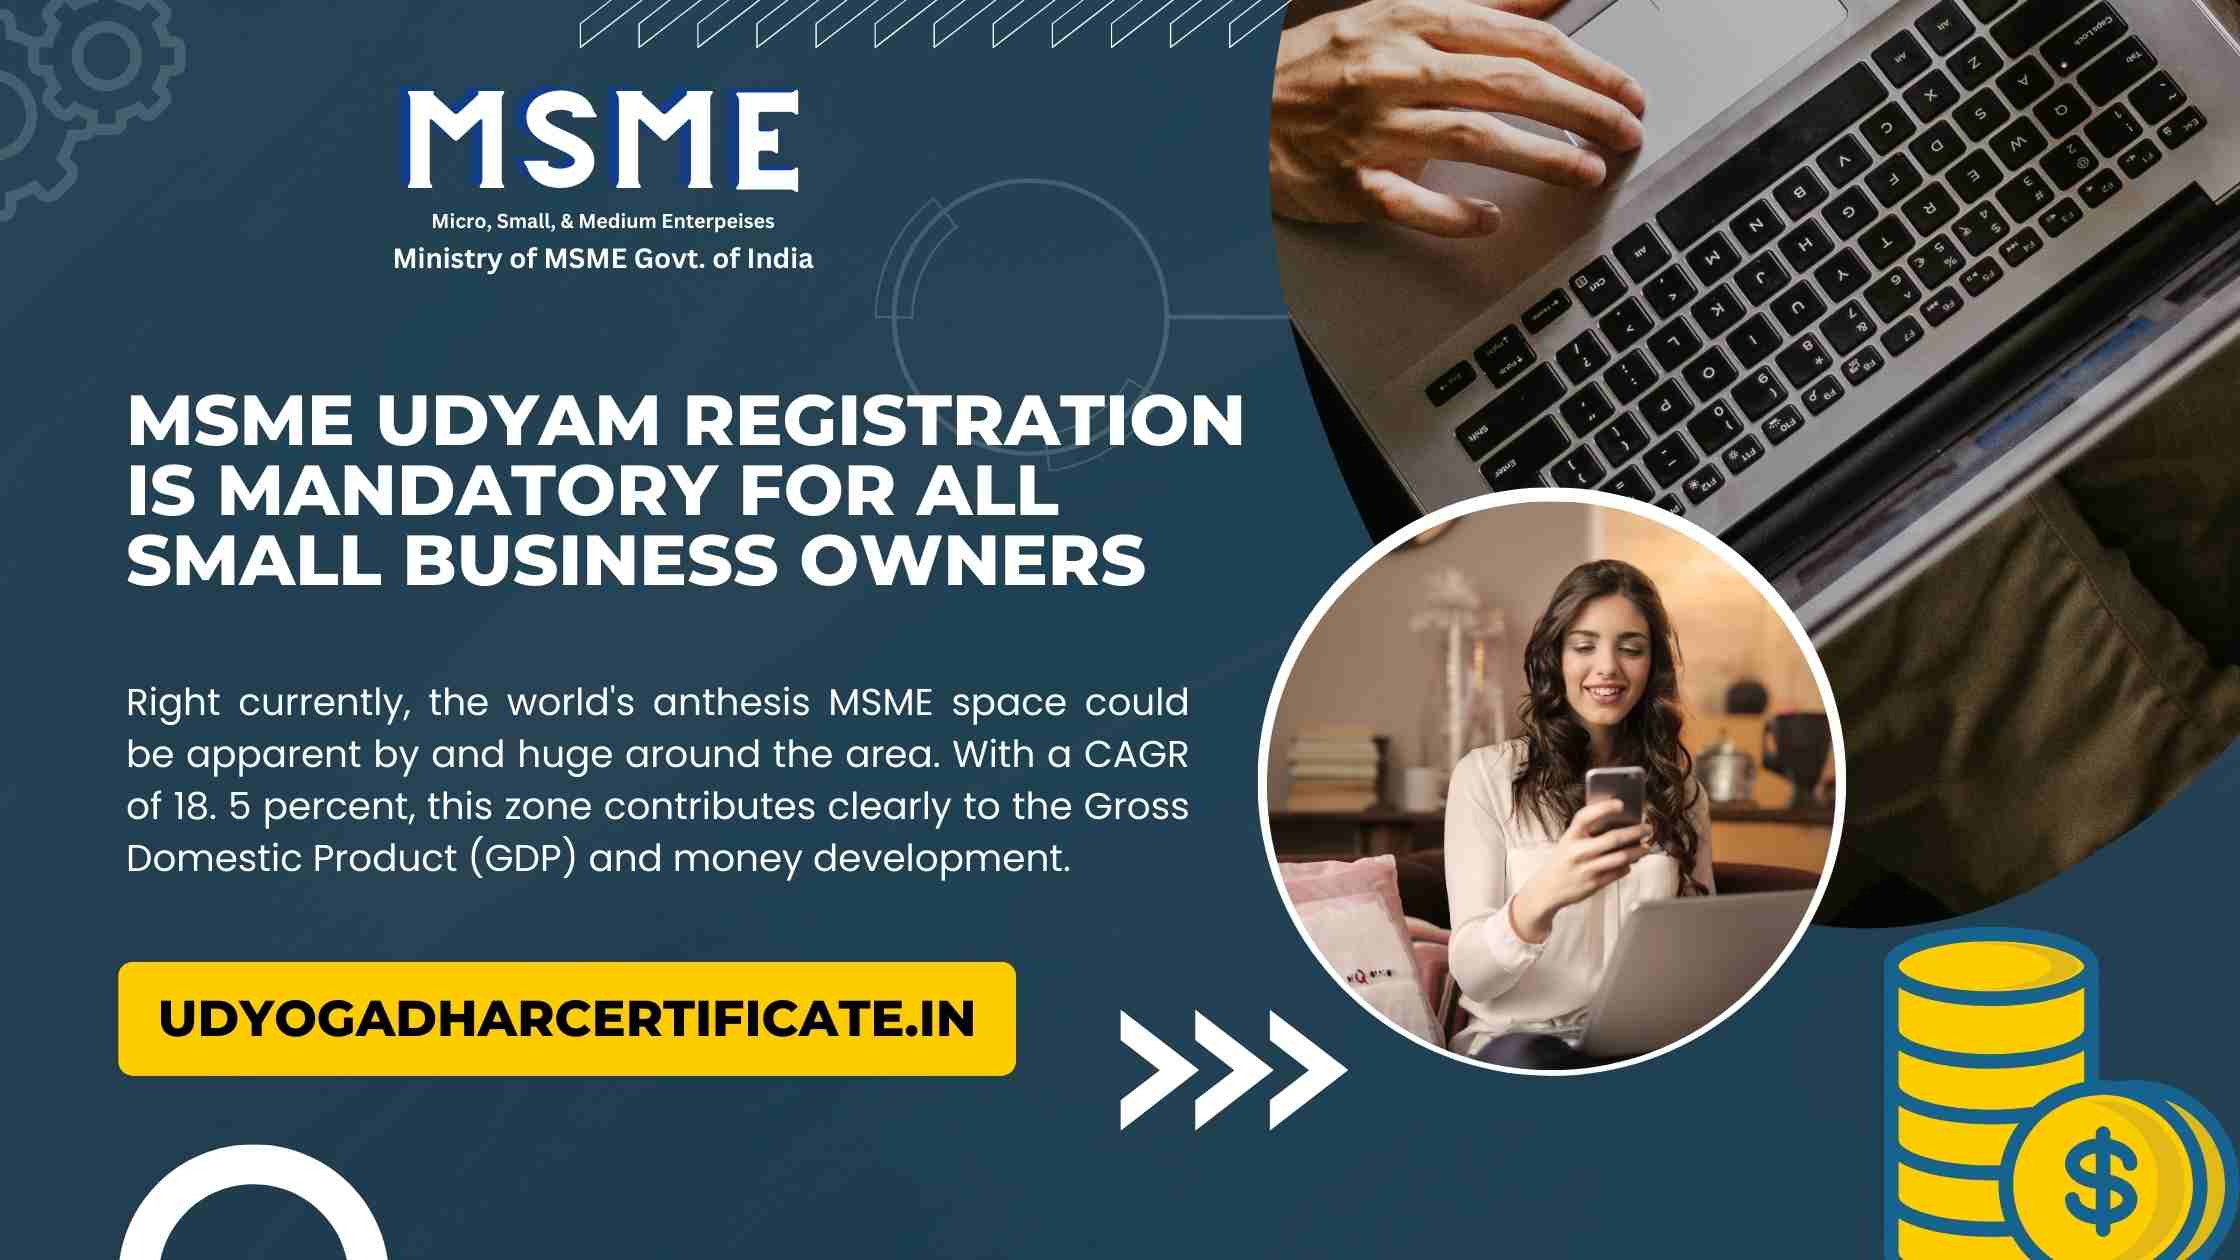 MSME Udyam Registration is Mandatory for All Small Business Owners